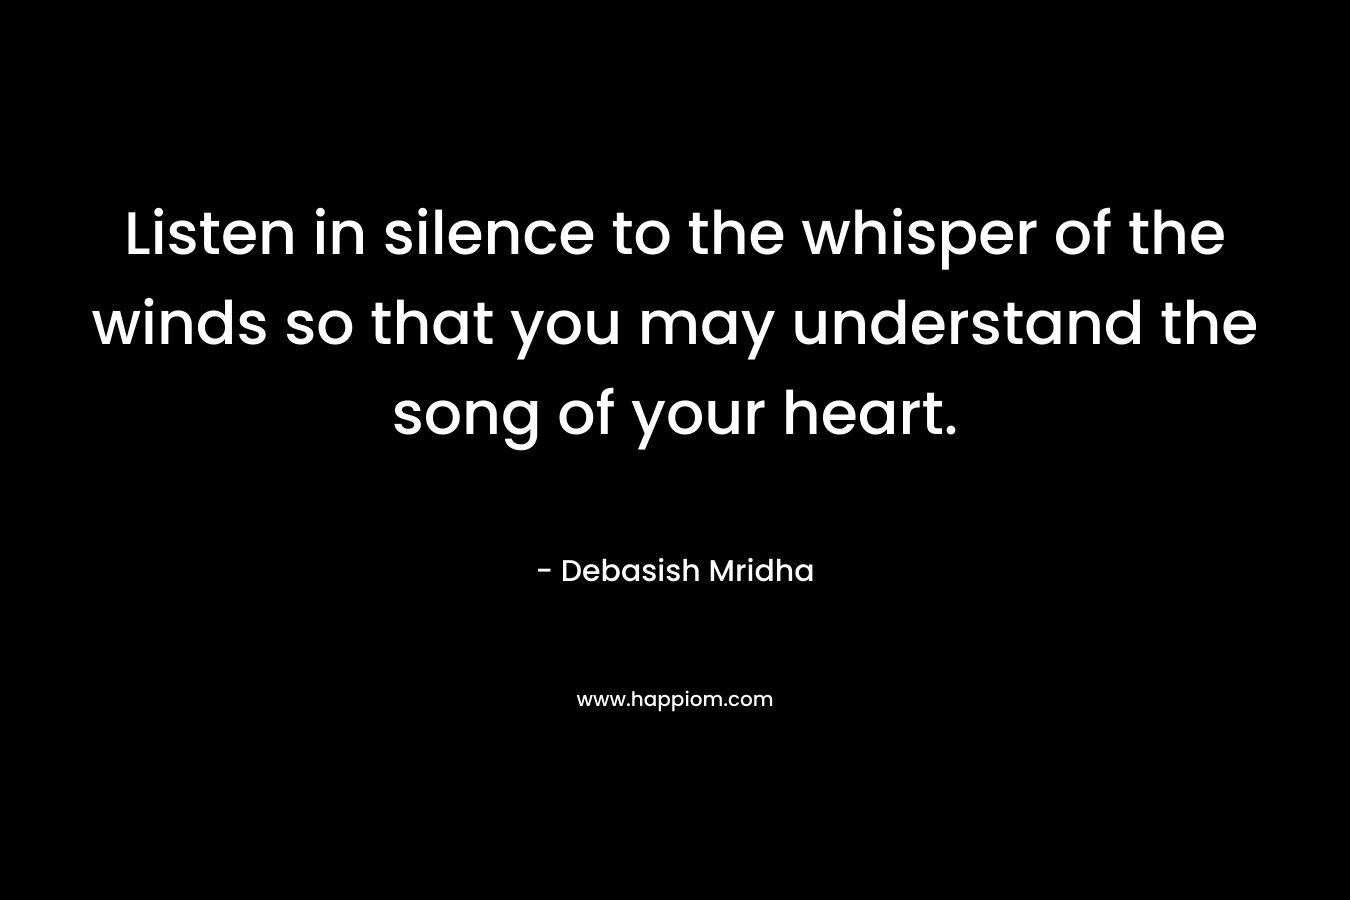 Listen in silence to the whisper of the winds so that you may understand the song of your heart.